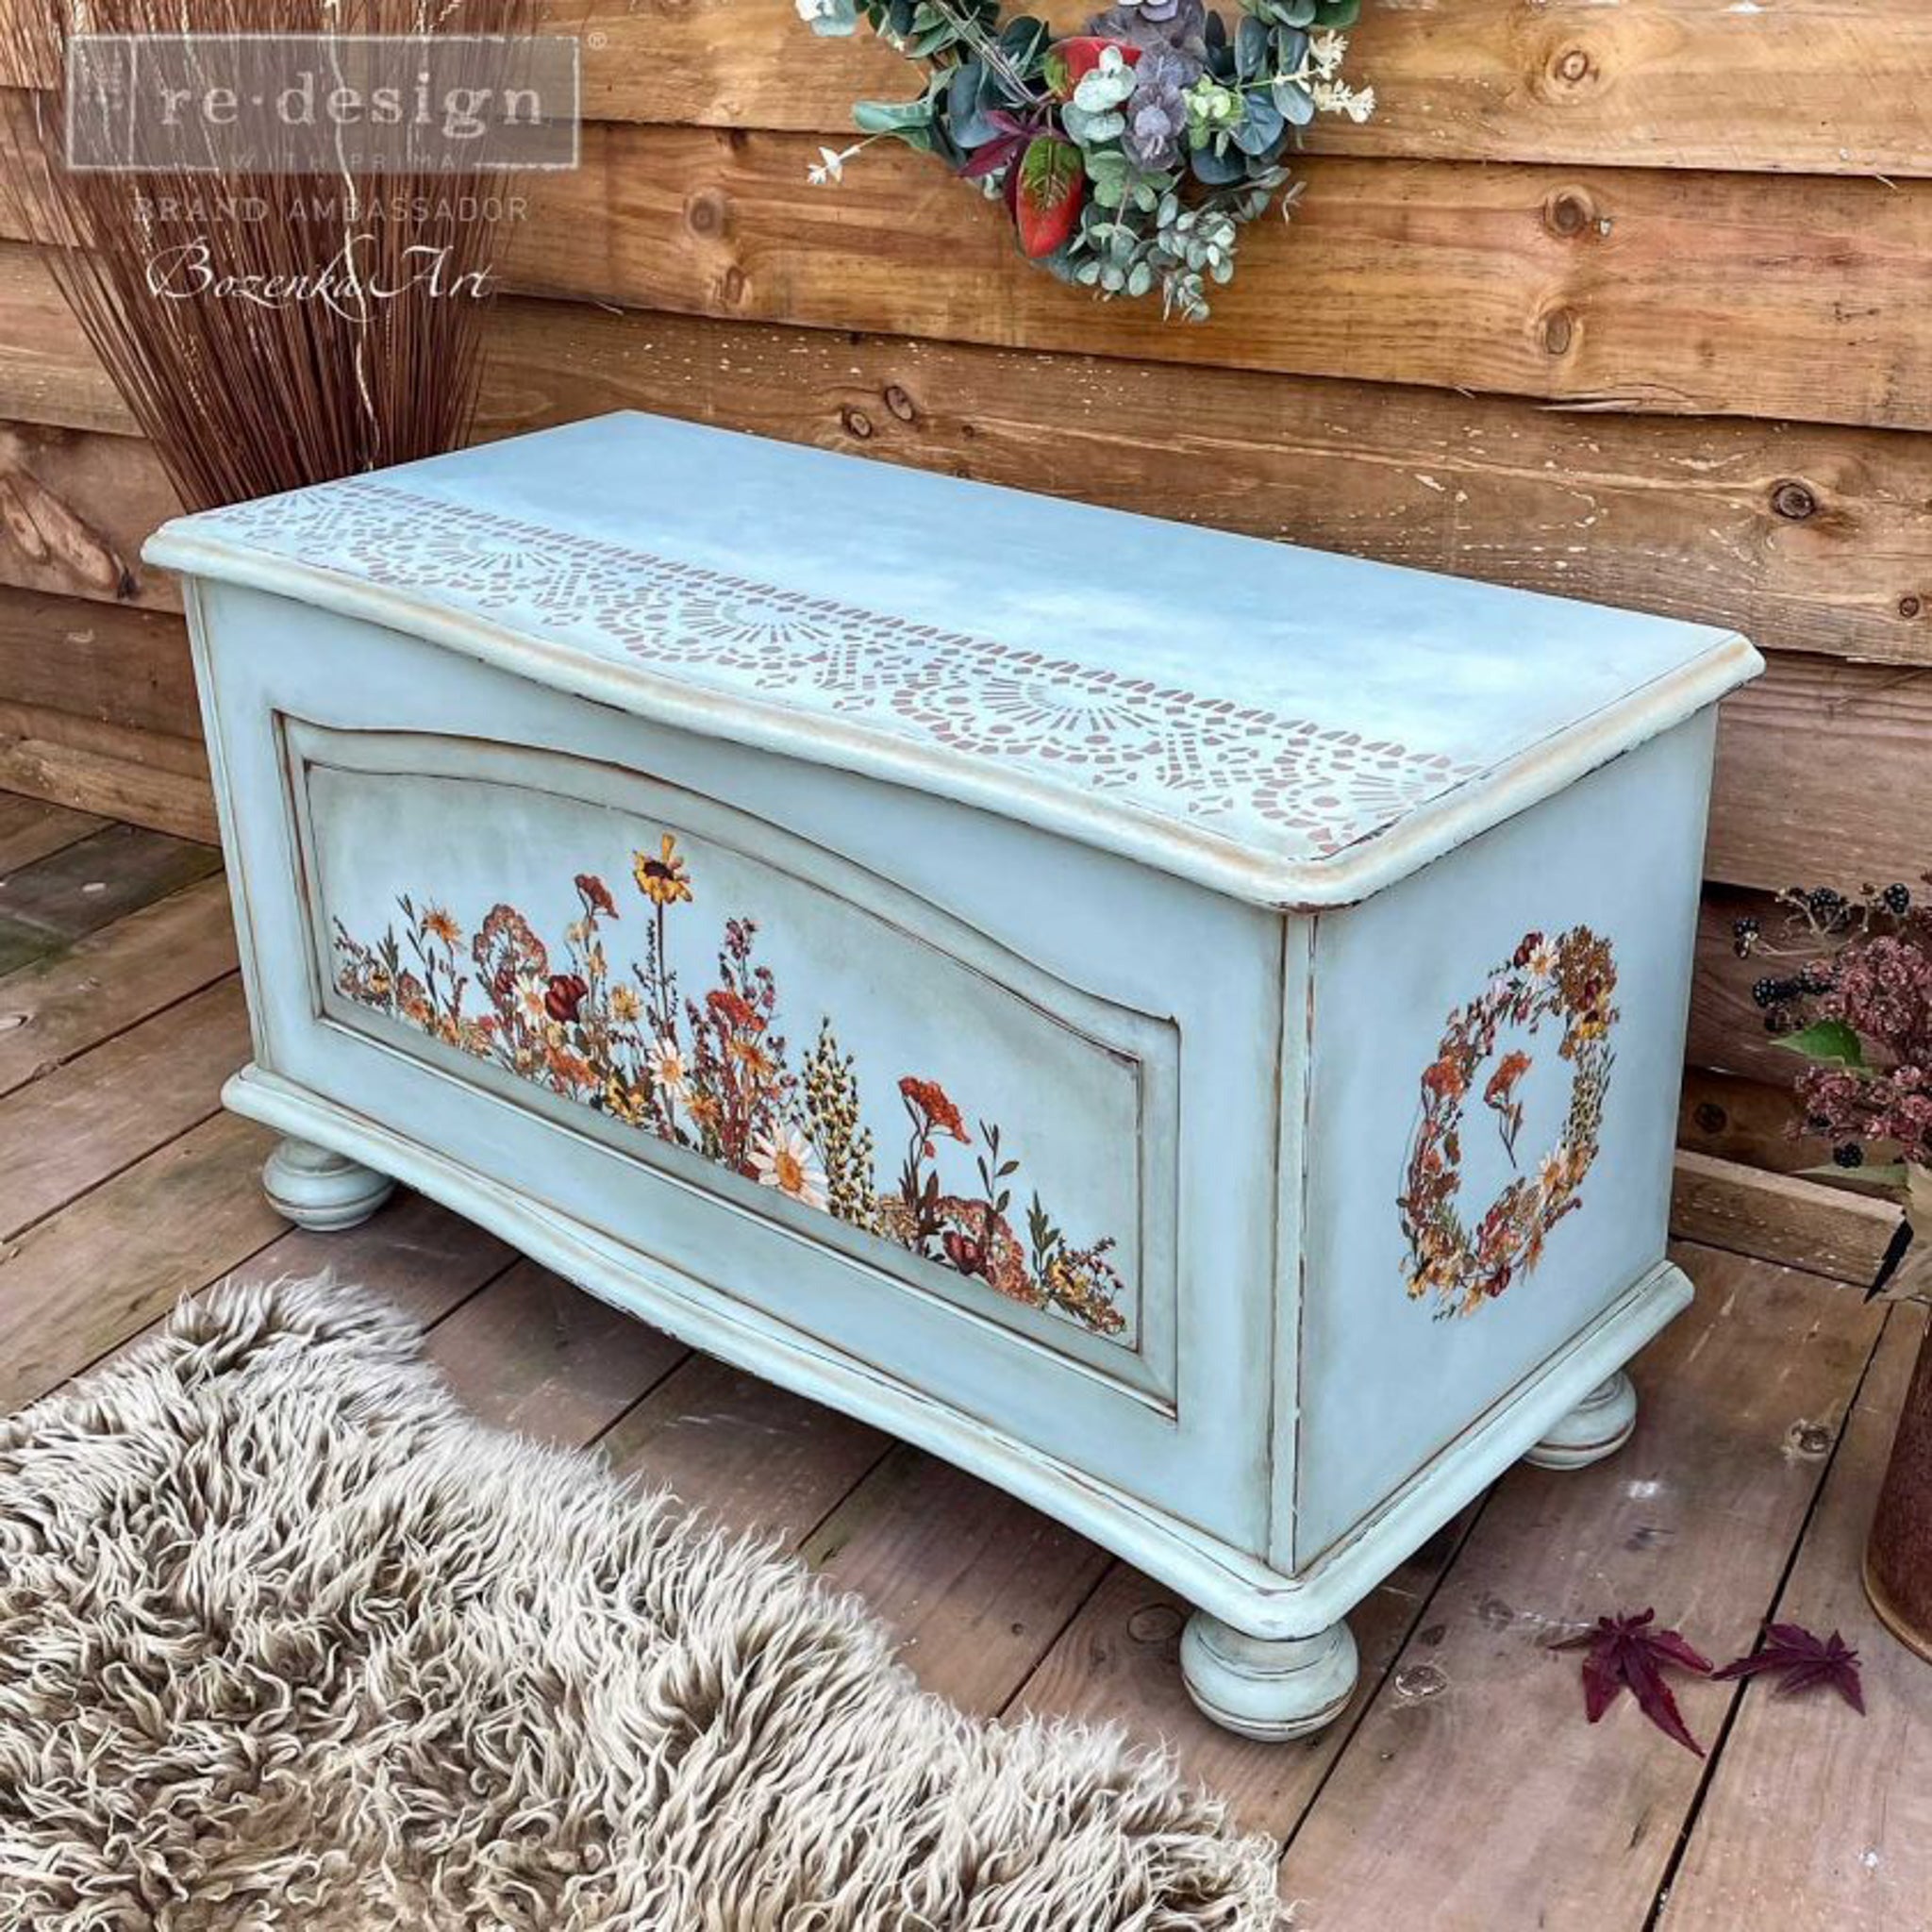 A vintage storage chest refurbished by Bozenka Art, a ReDesign with Prima Brand Amabassador, is painte pale blue and features the Dried Widflowers small transfer on it.